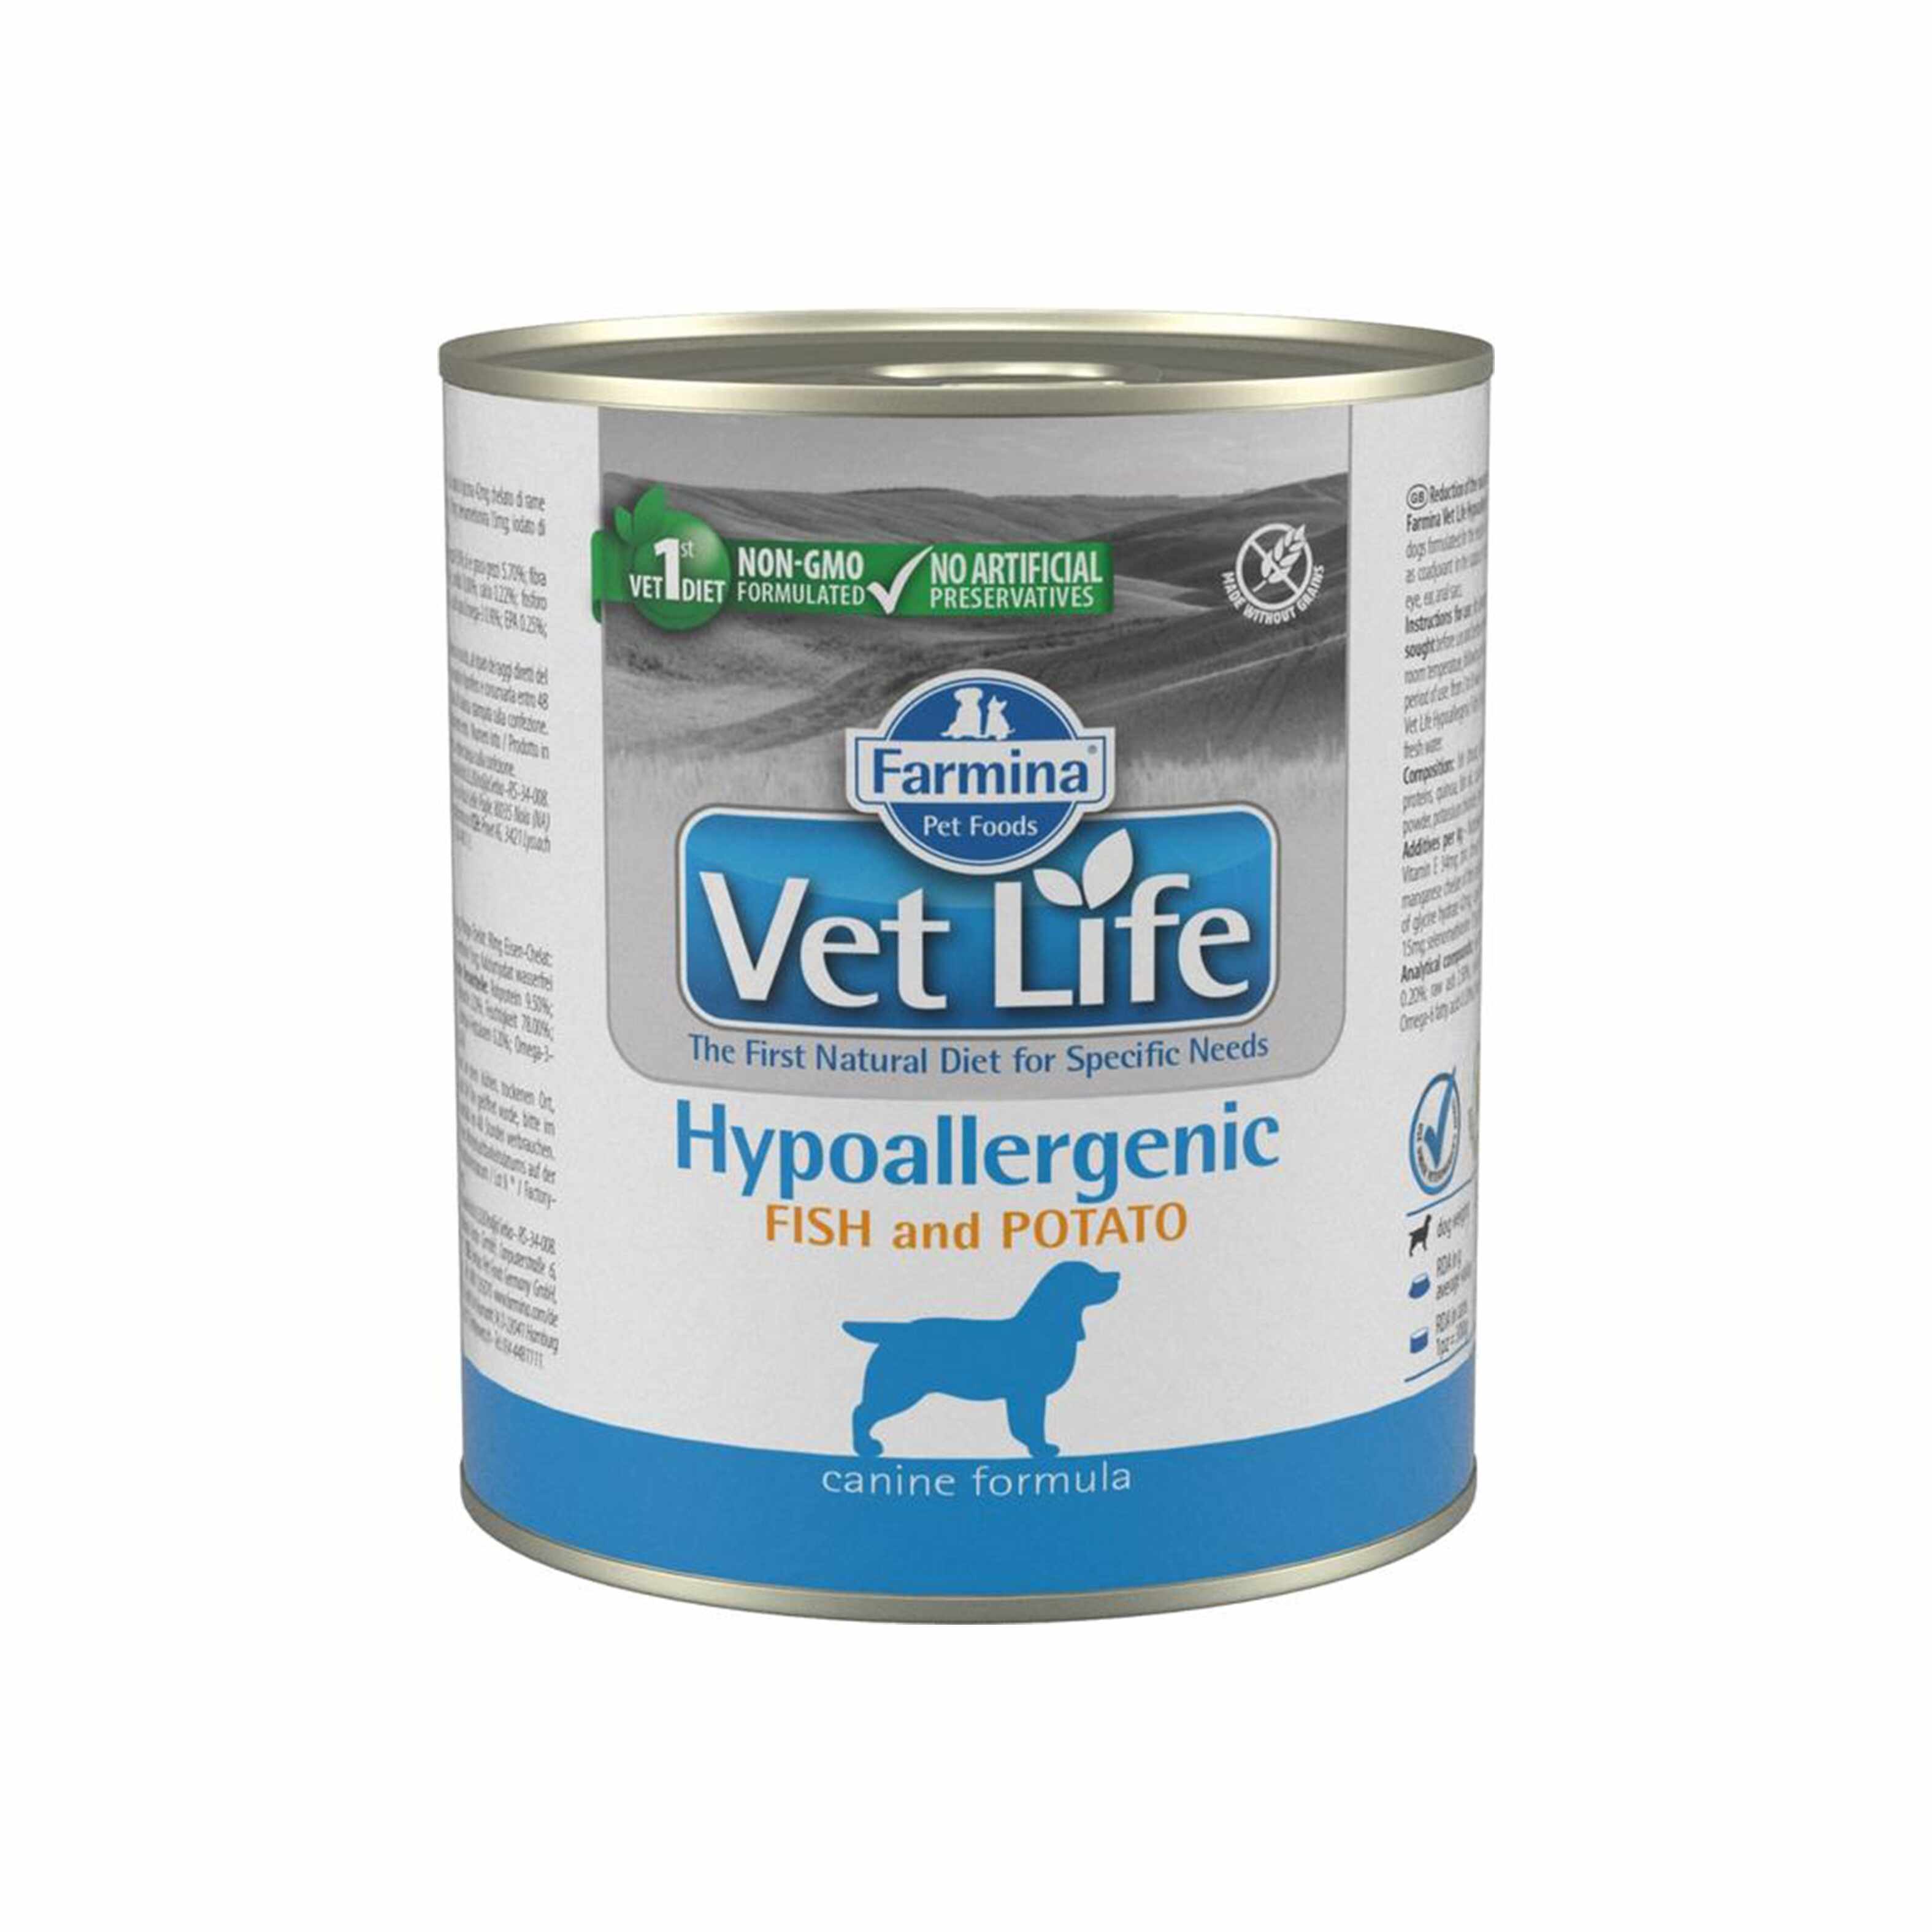 Vet Life Natural Diet Dog Hypoallergenic Fish and Potato, 300 g